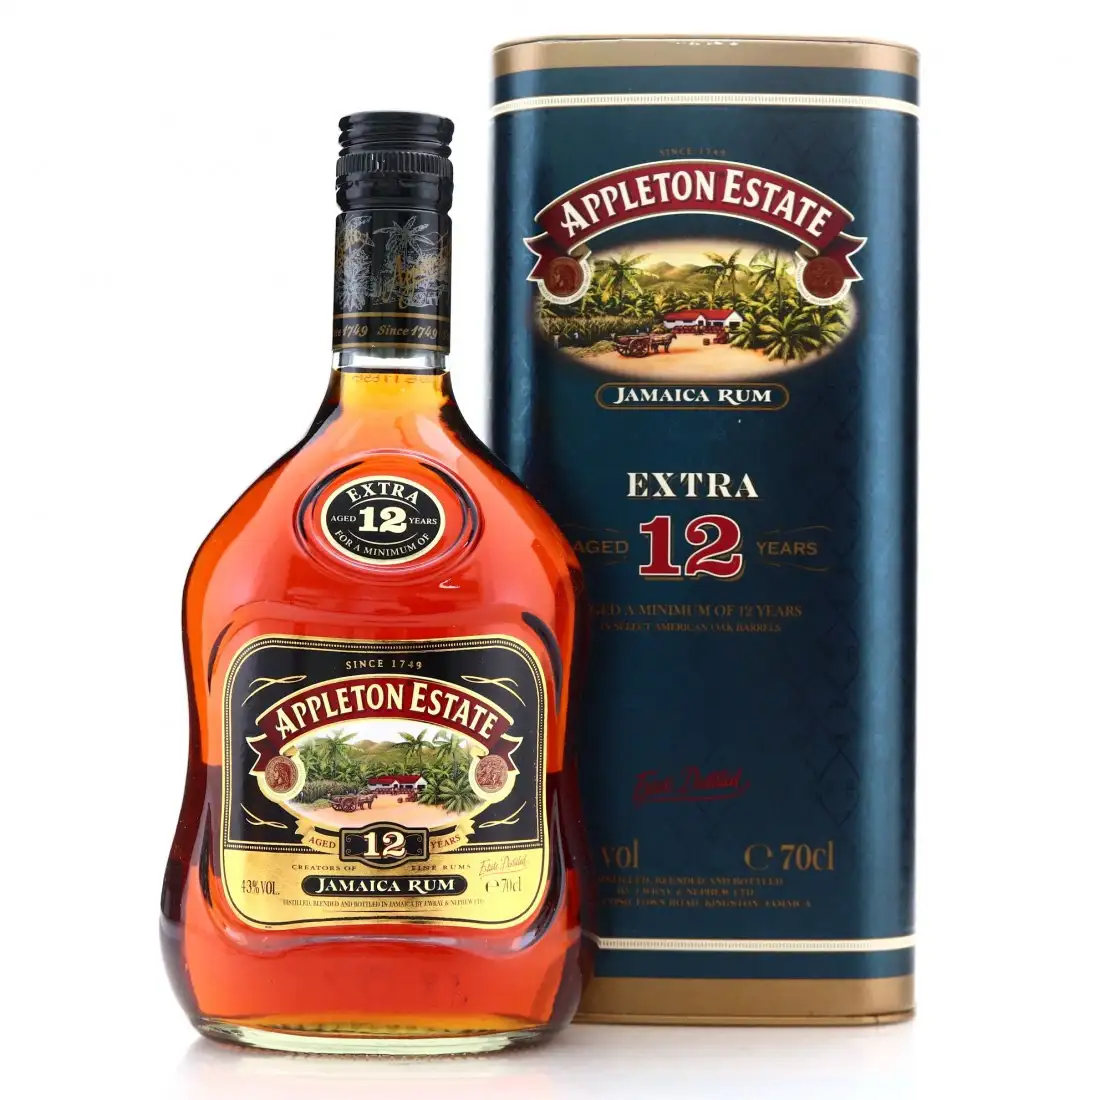 Image of the front of the bottle of the rum Extra